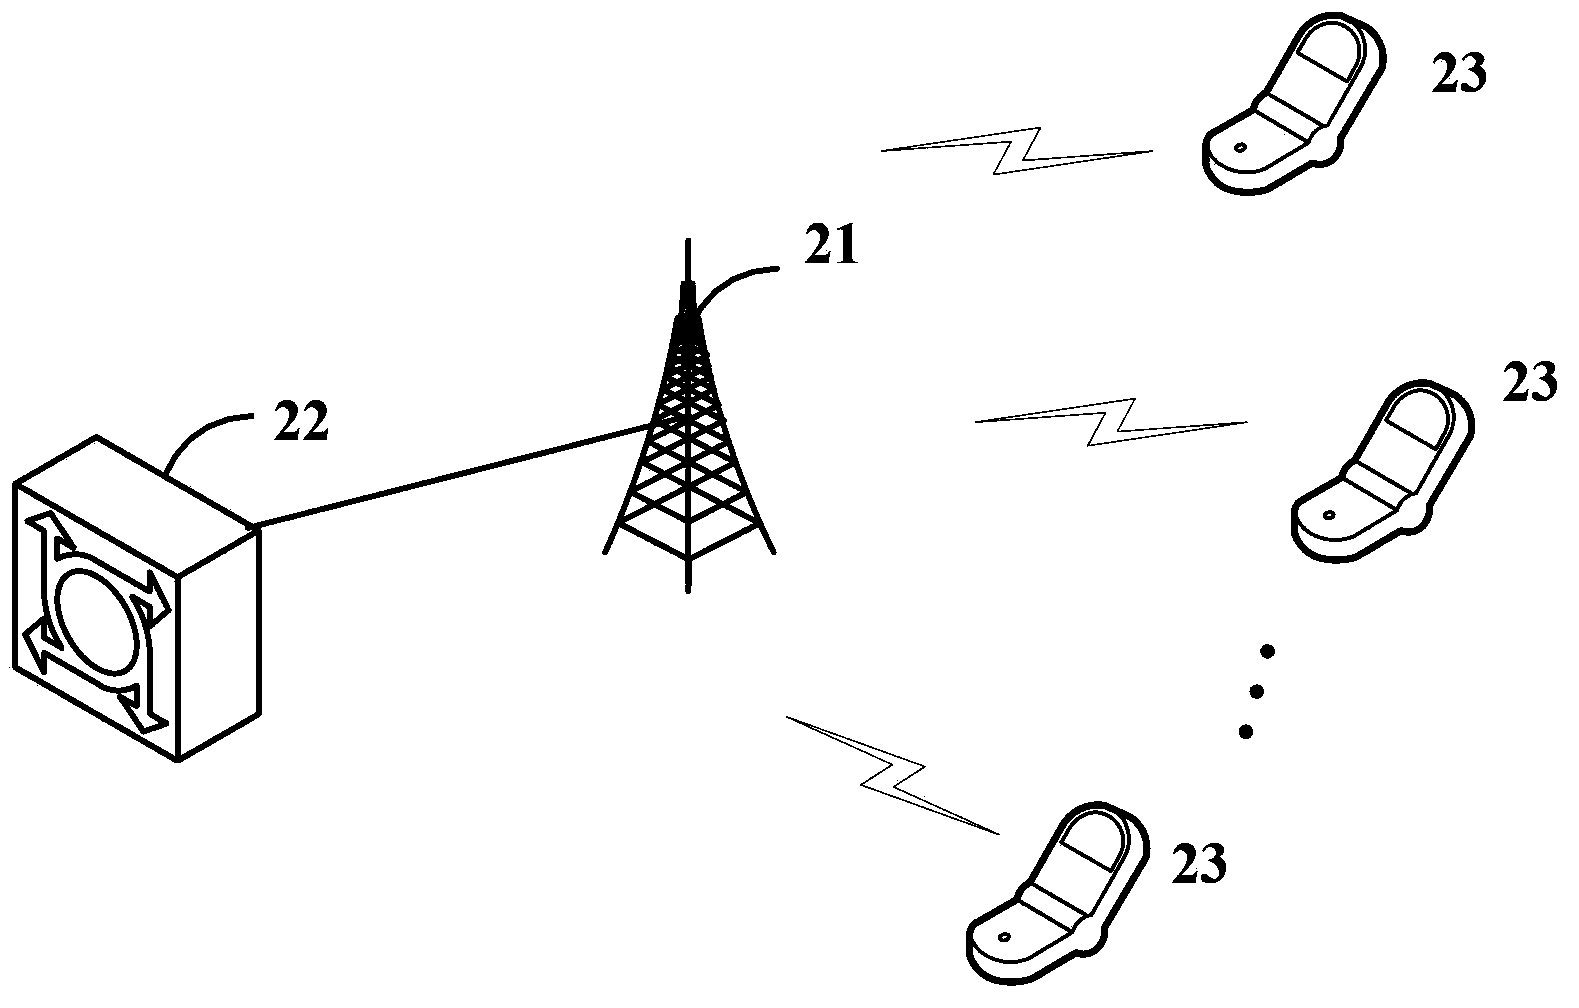 Interference detection method, device and system